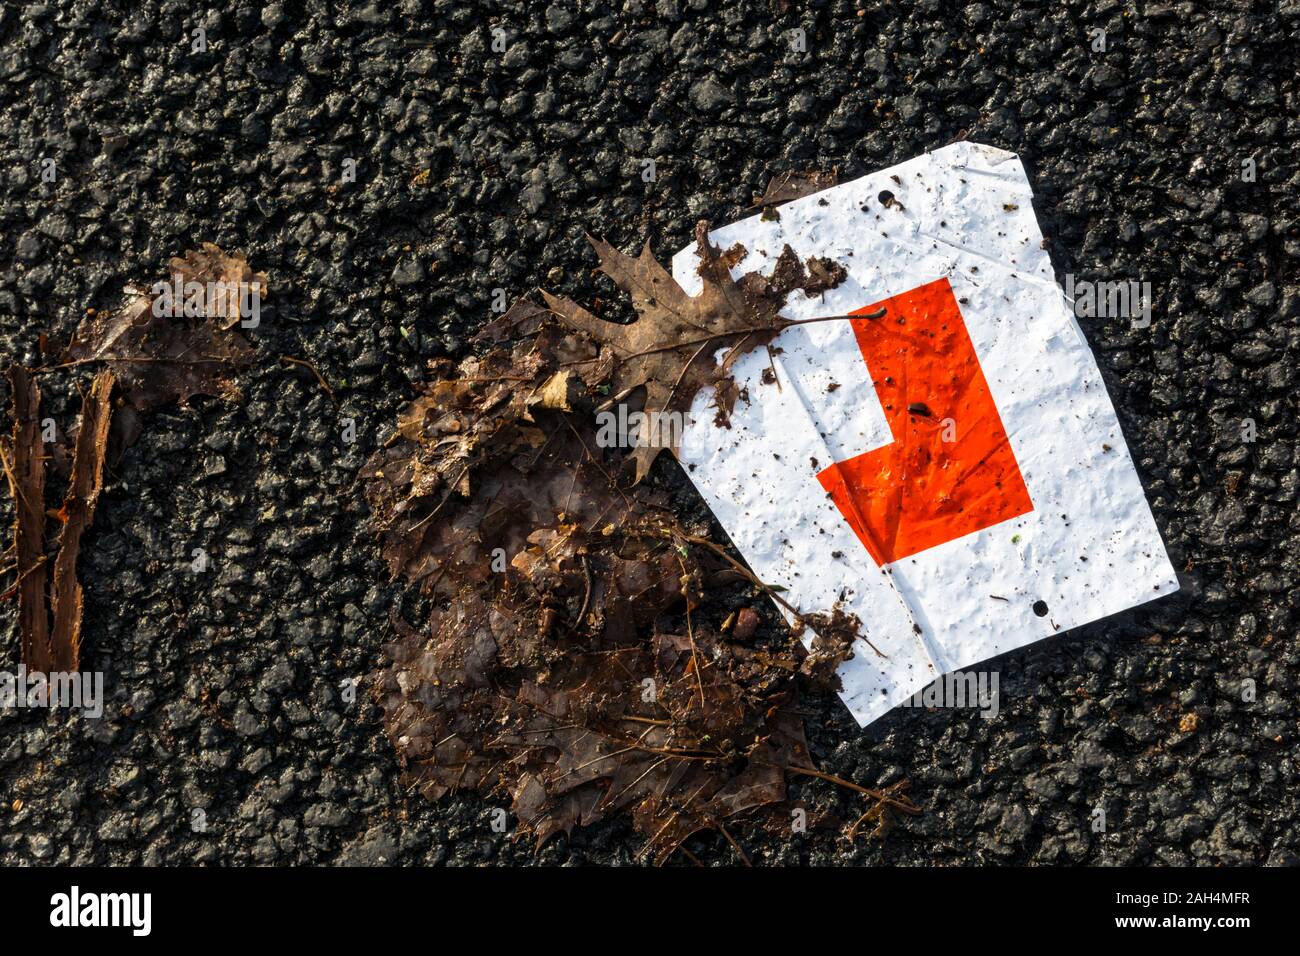 Screwed up L plate abandoned on a tarmac road. Stock Photo